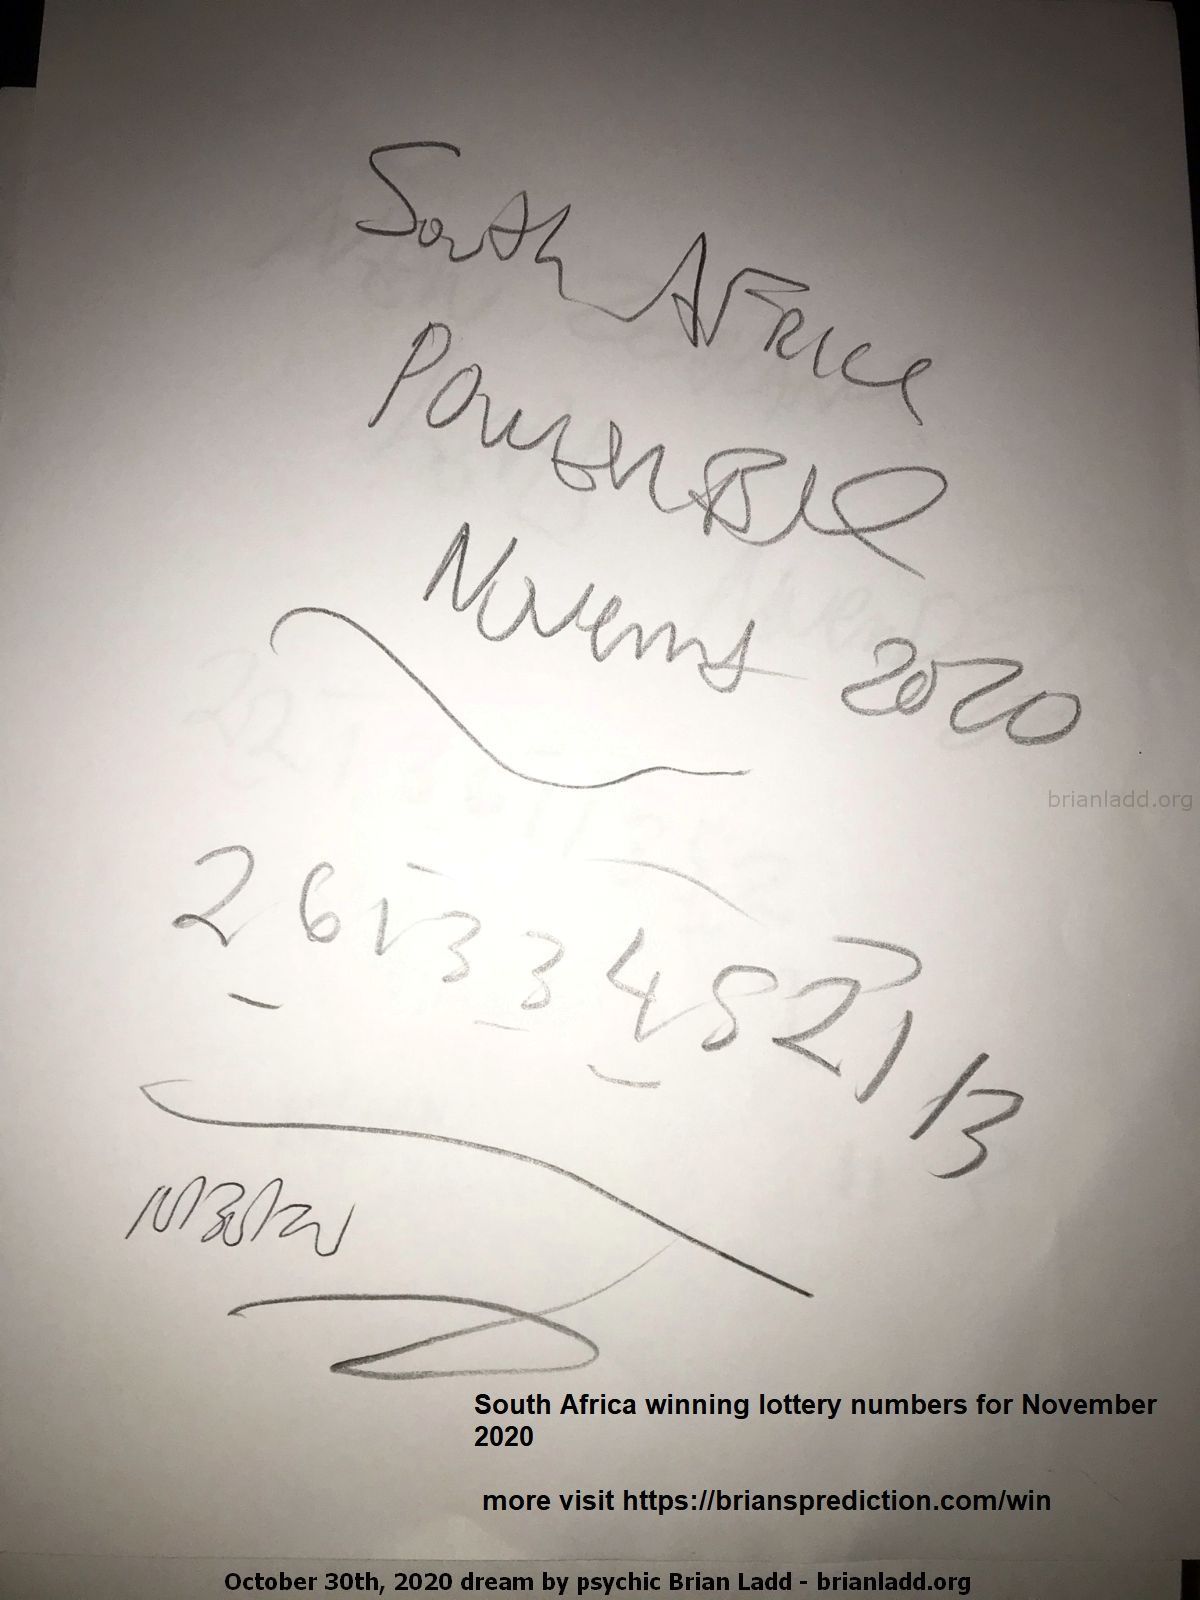 13952 30 October 2020 2 - South Africa Winning Lottery Numbers For November 2020 For More Visit https://Brianspredicti...
South Africa Winning Lottery Numbers For November 2020 For More Visit  https://briansprediction.com/Win  ( NEW!  Free lottery picks by mail, I will personally fill out your blank lottery sheet and mail it back to you for free, postage is included!  visit  https://briansprediction.com/picksbymail   )
